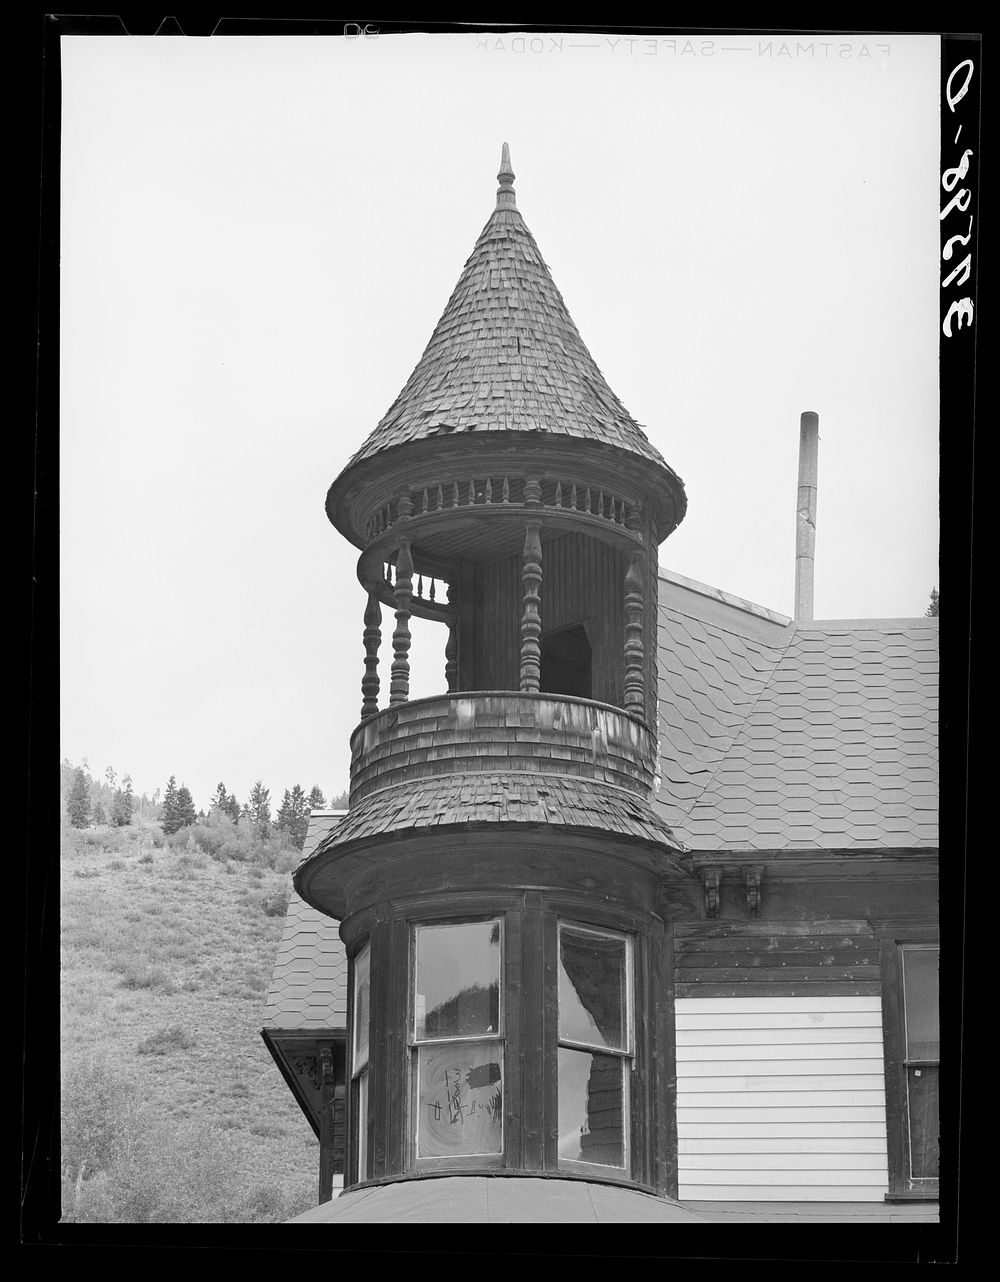 Detail of cupola on house. Telluride, Colorado by Russell Lee